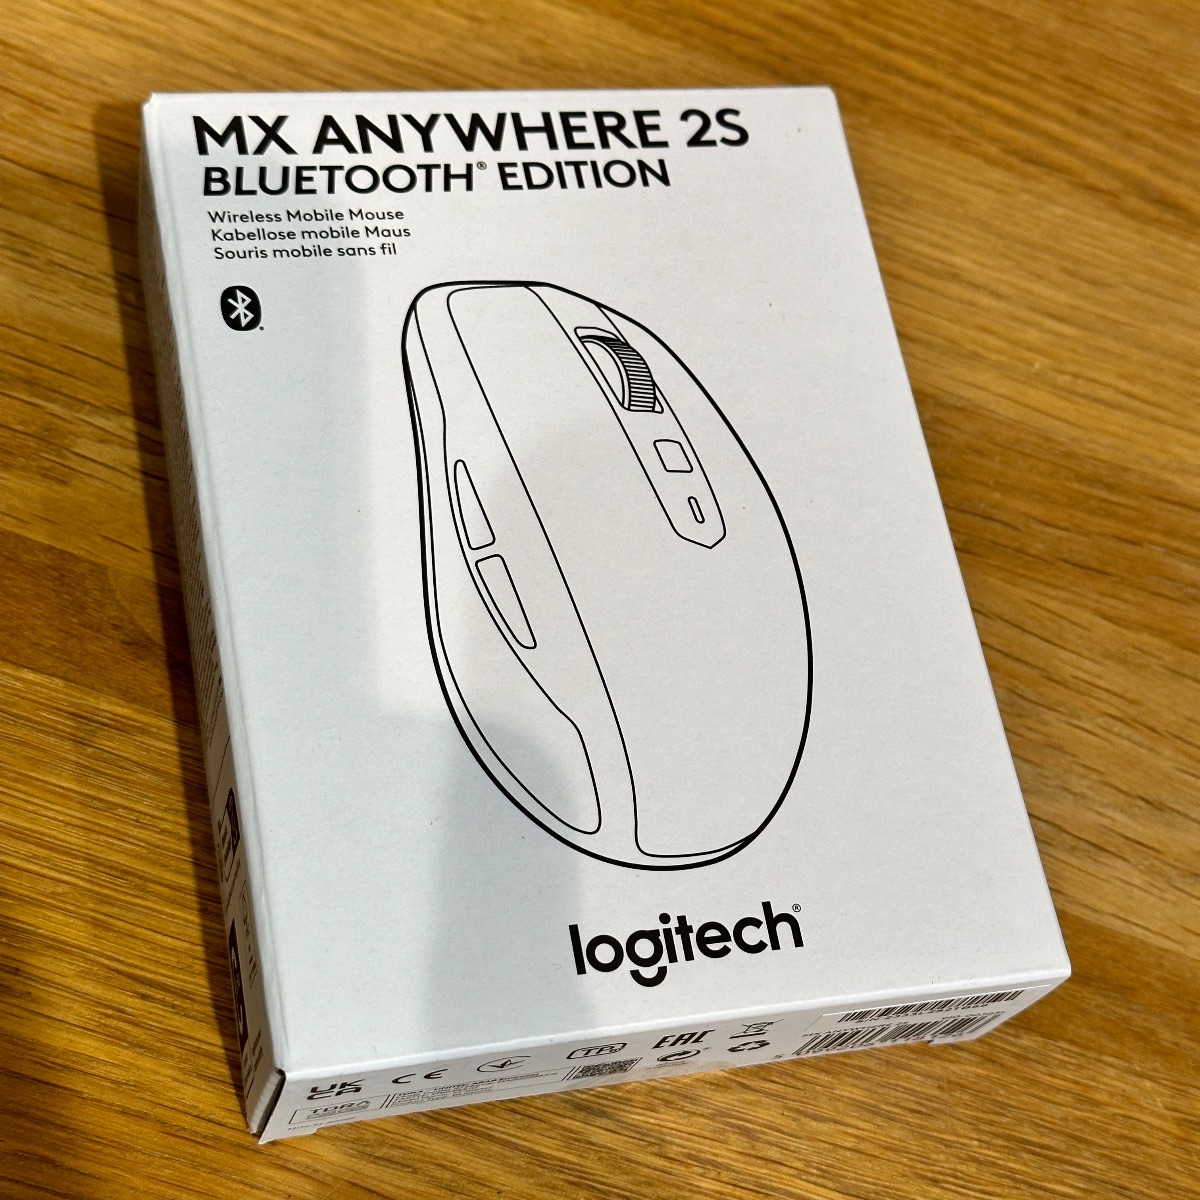 Logitech MX Anywhere 2S Mouse Wireless Mobile Bluetooth Rechargeable Battery 910007231 5099206118126 (Brand New)